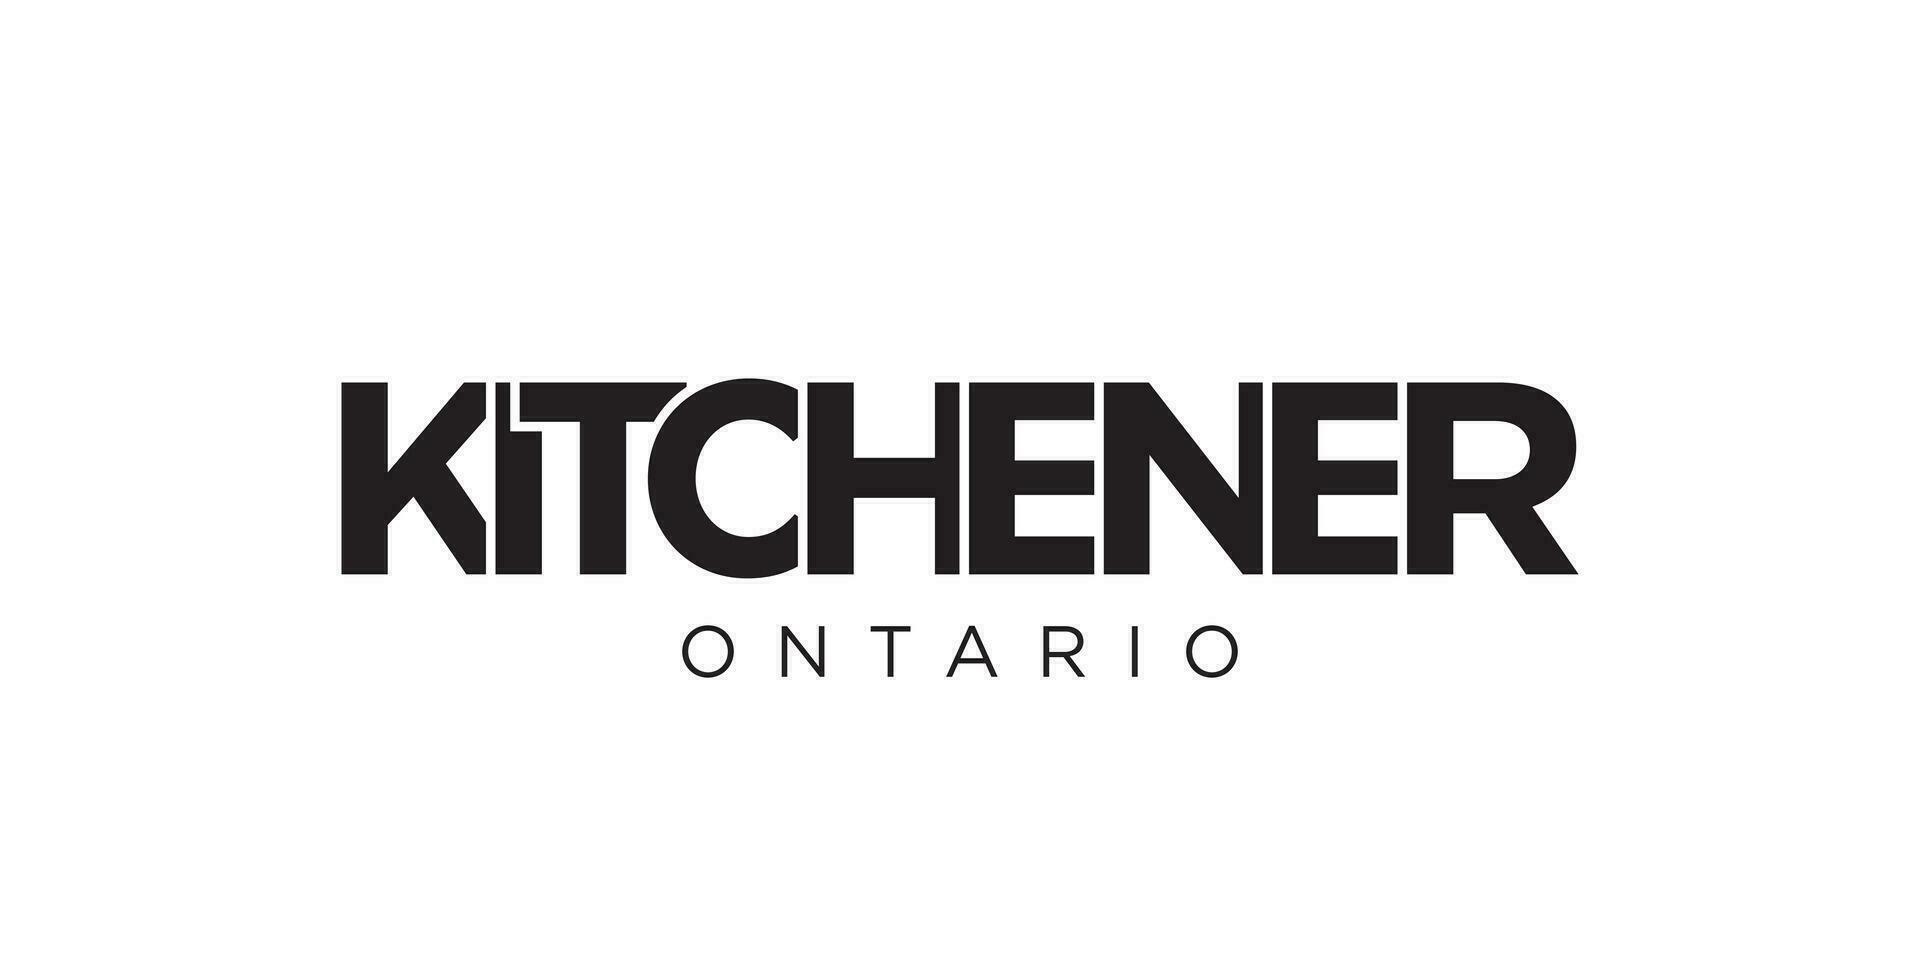 Kitchener in the Canada emblem. The design features a geometric style, vector illustration with bold typography in a modern font. The graphic slogan lettering.